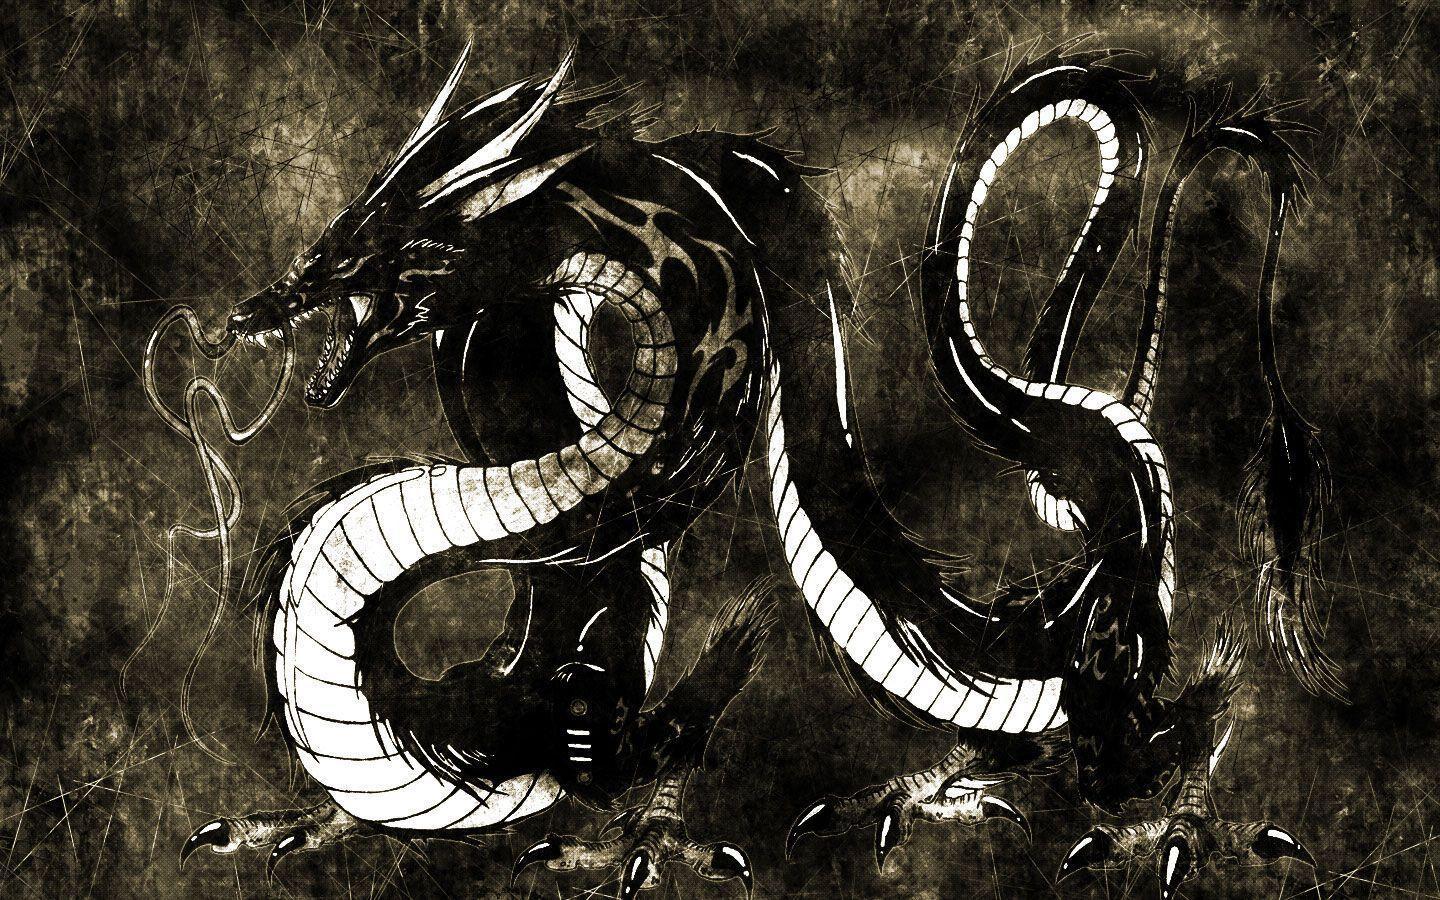 Dragon in ancient China Wallpaper. High Quality Wallpaper